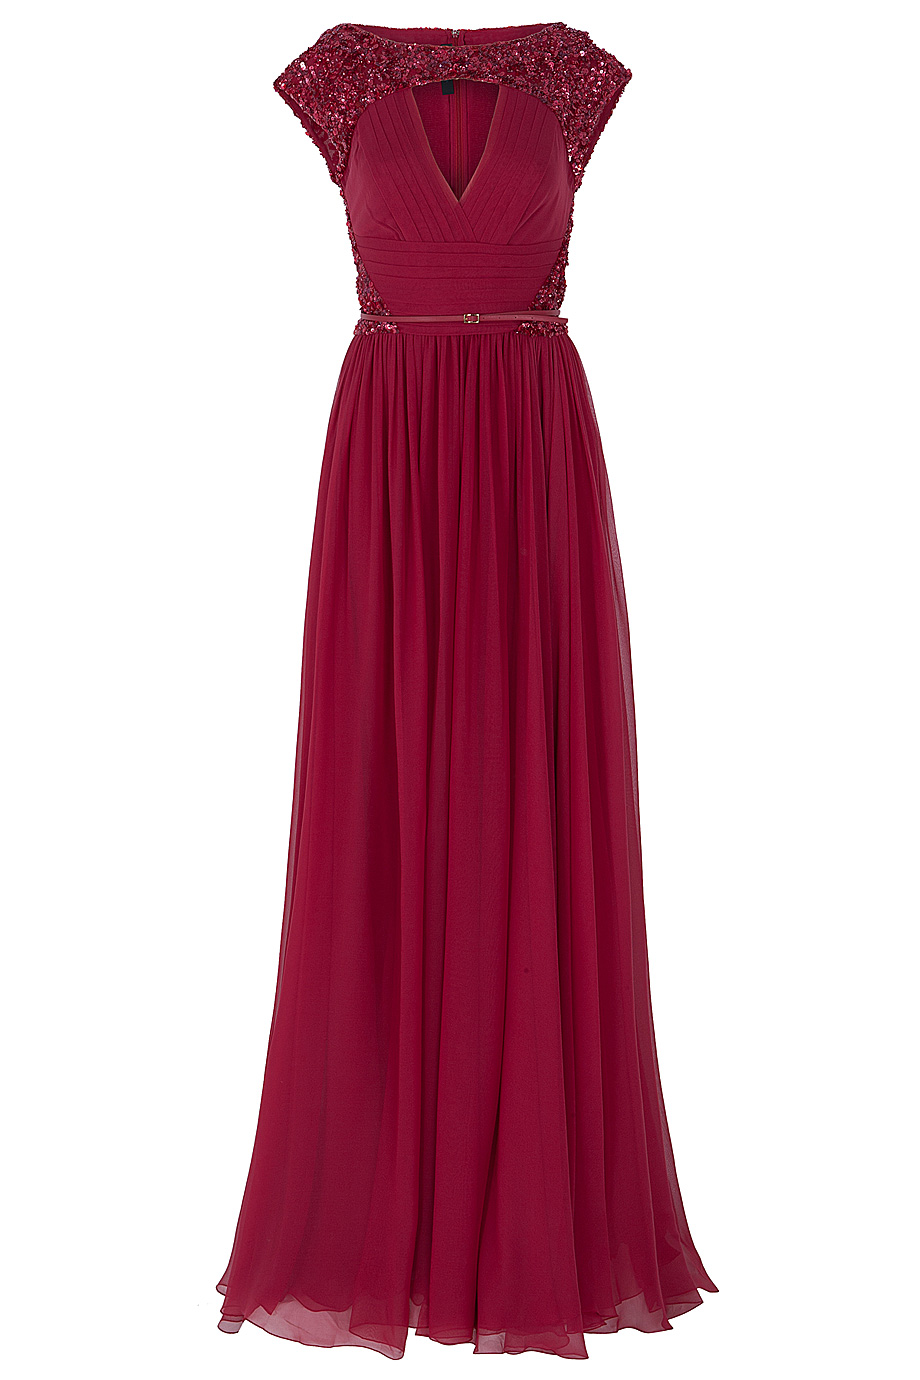 Elie Saab Chiffon Beaded Cap Sleeve Gown in Red (cherry) | Lyst